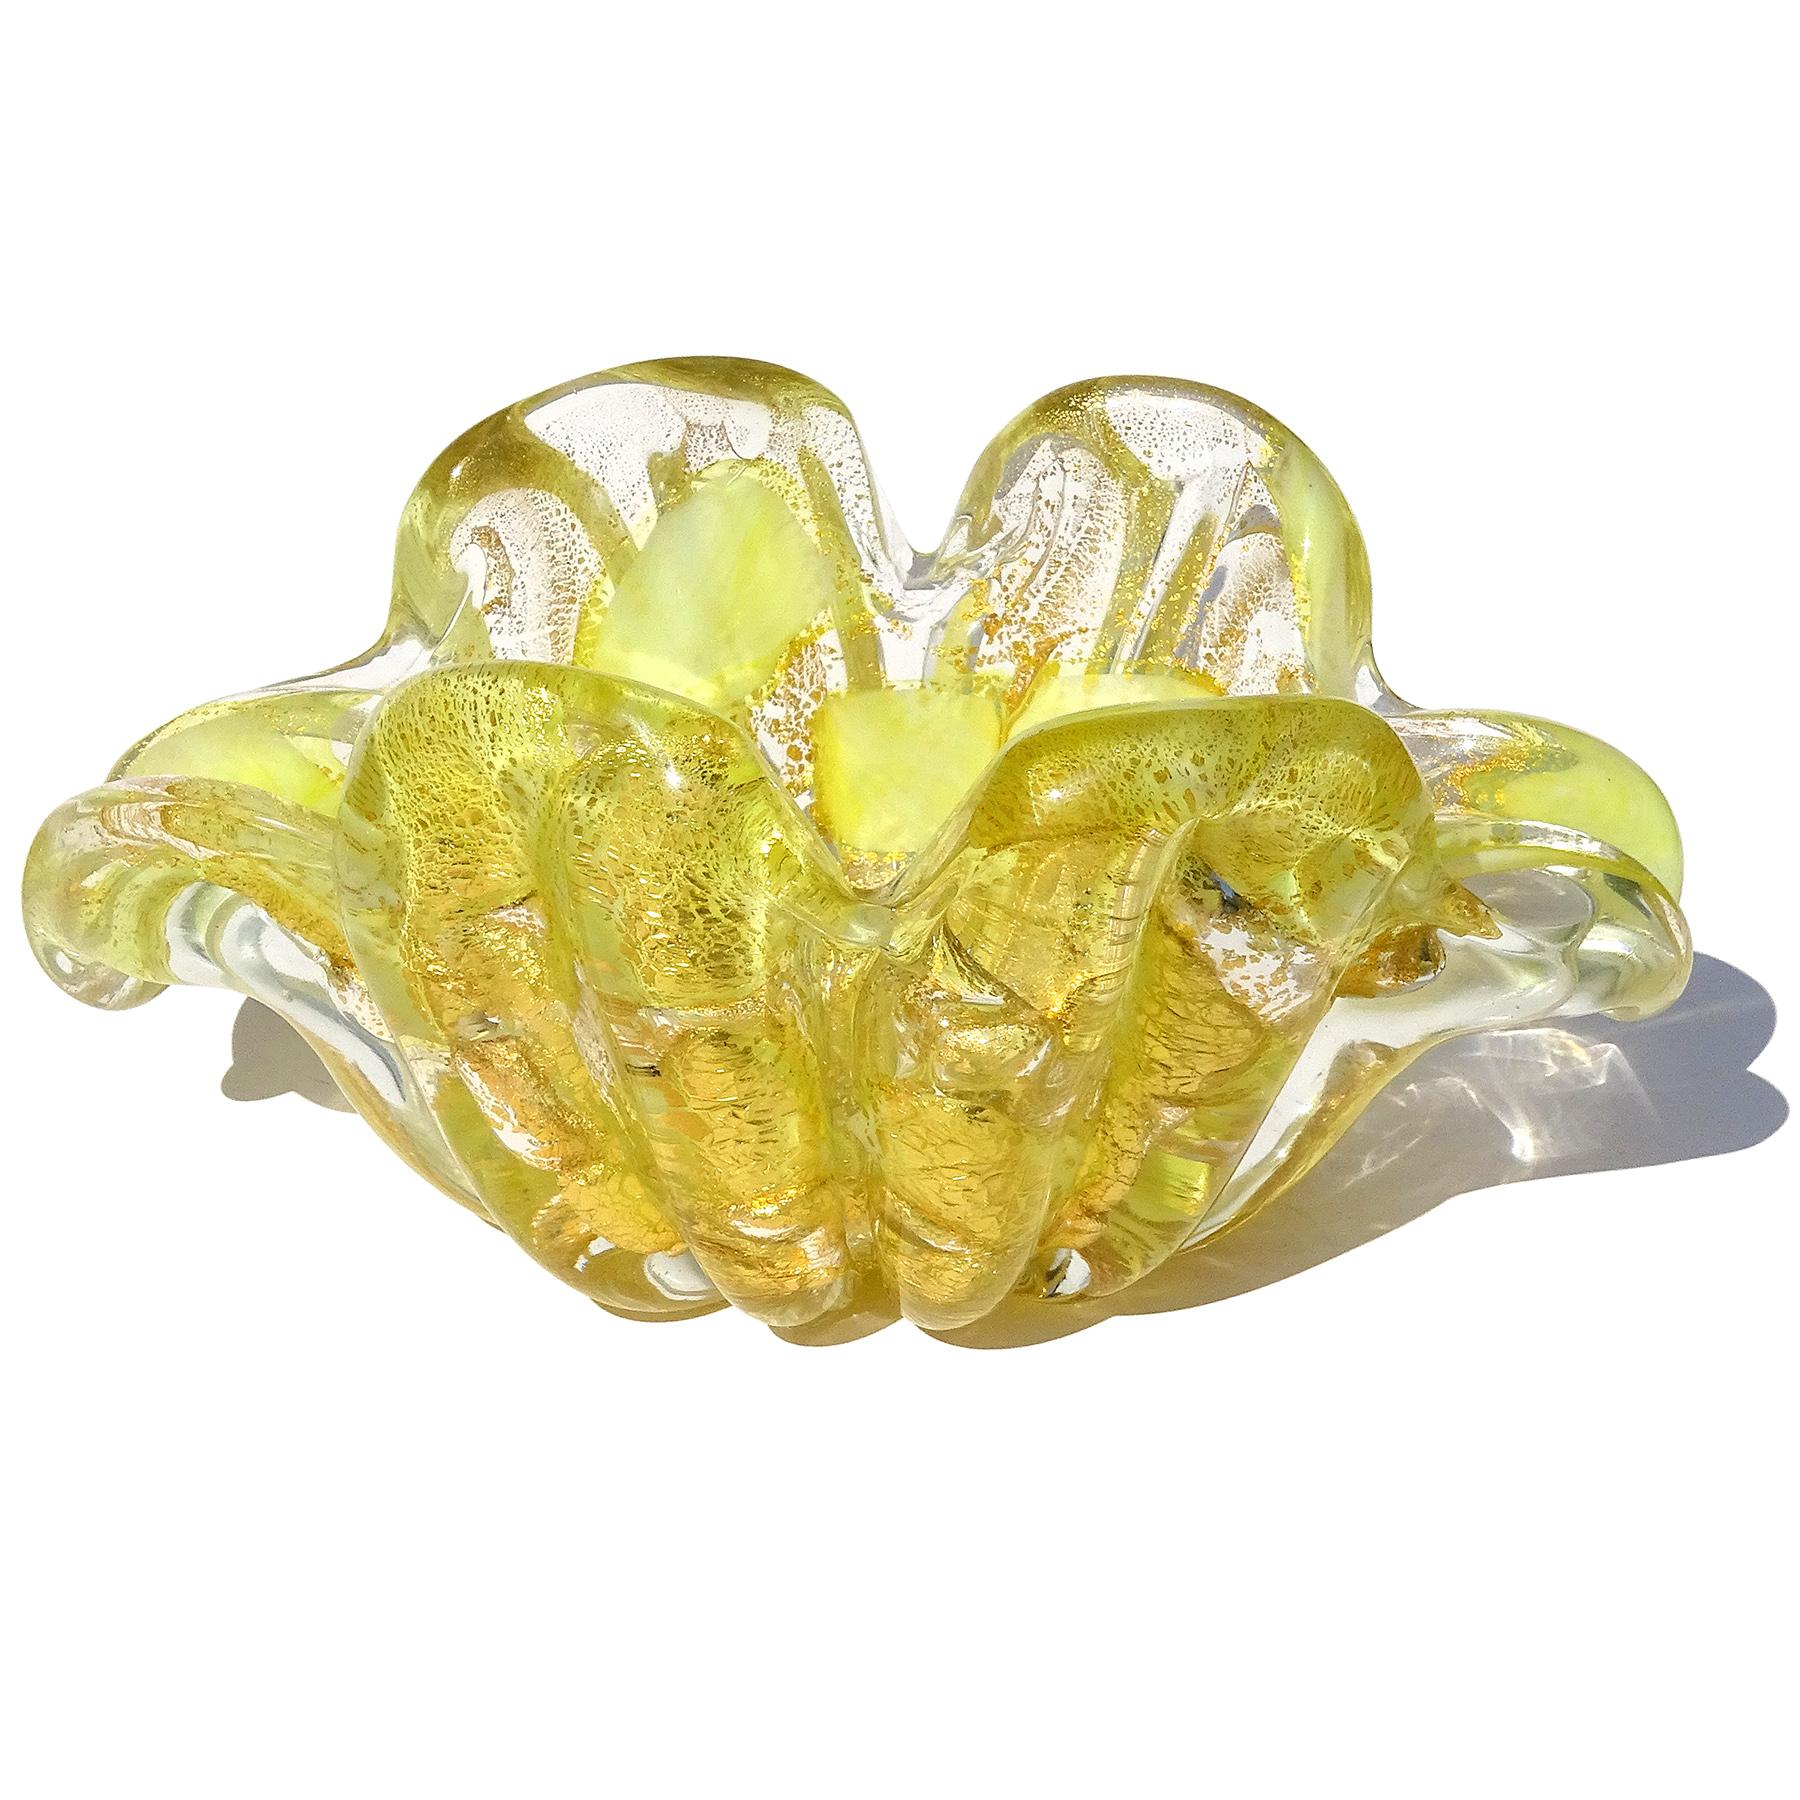 Beautiful vintage Murano hand blown bright yellow and gold flecks Italian art glass flower form bowl or ashtray. Documented to the Barovier e Toso company. The bowl is decorated with yellow color spots and very thick and heavy glass. It has a ribbed